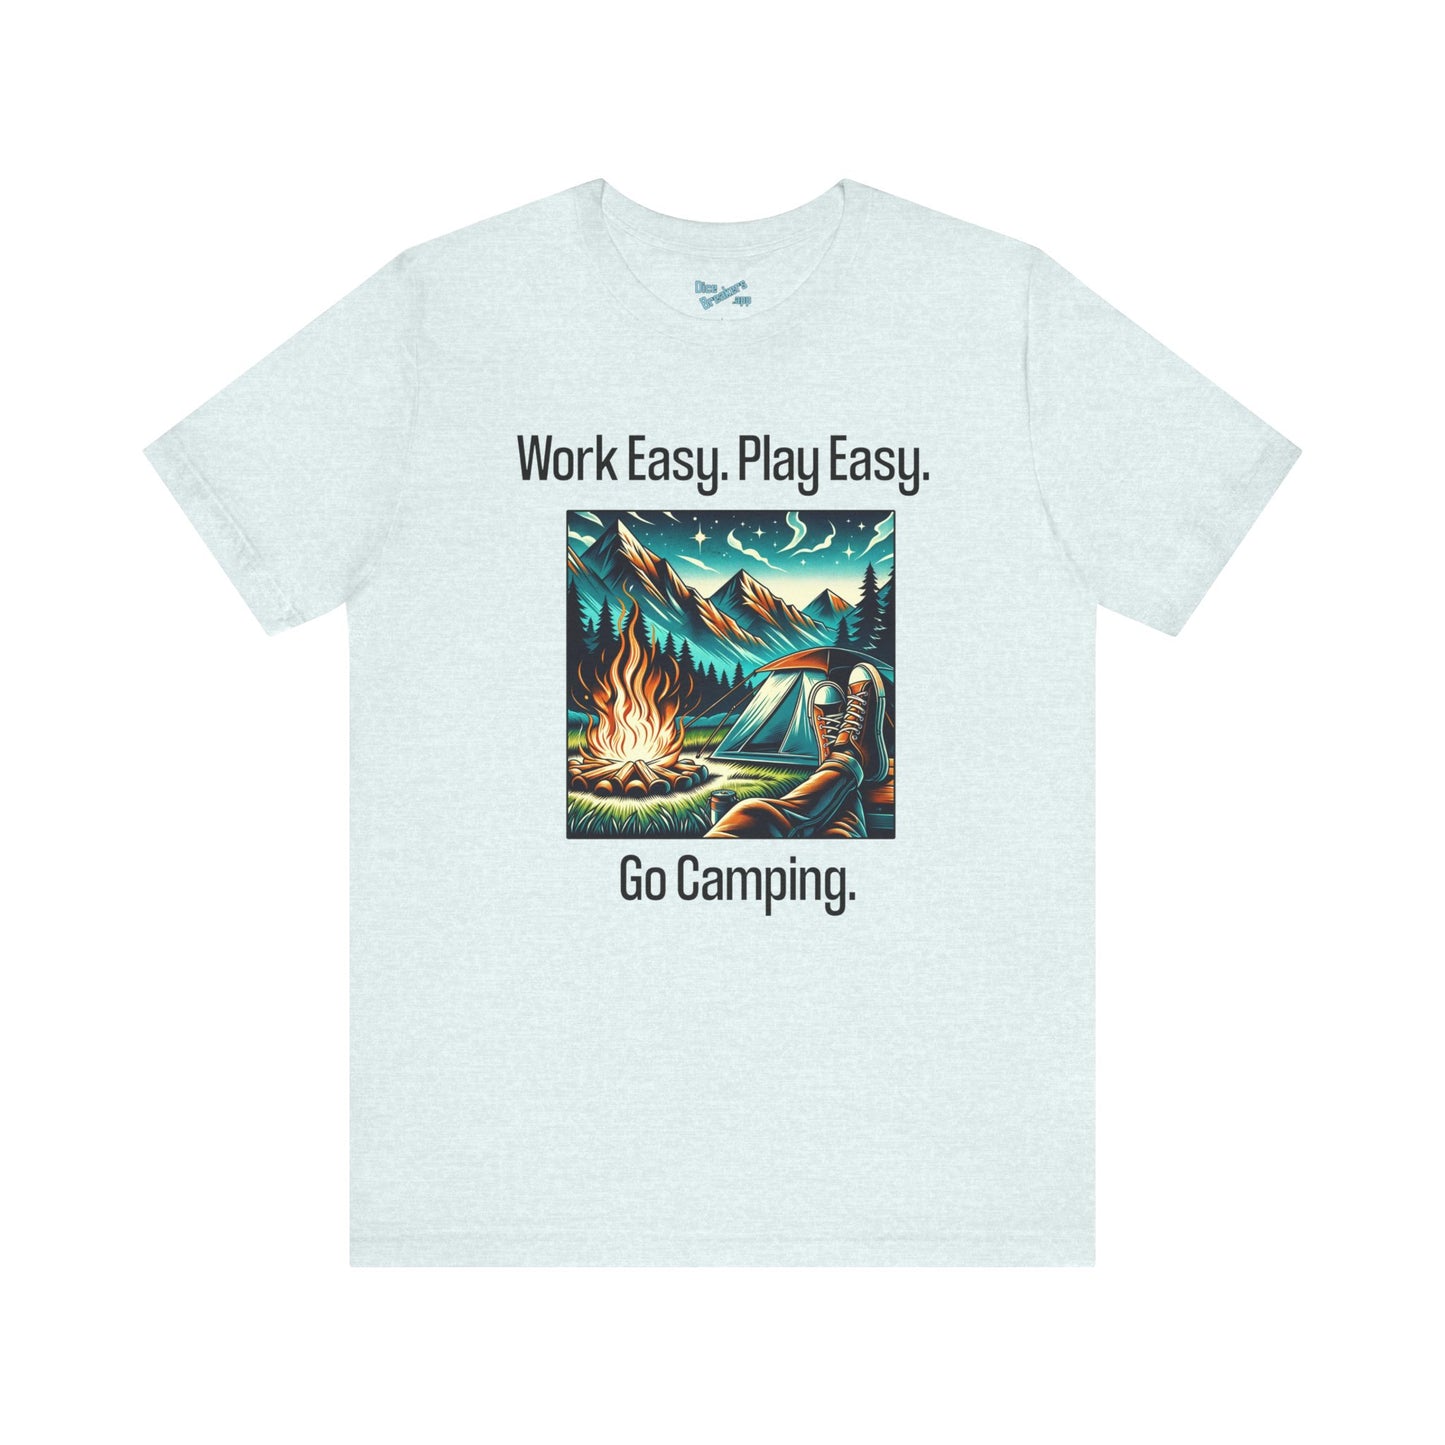 Work Easy. Play Easy. Go Camping.